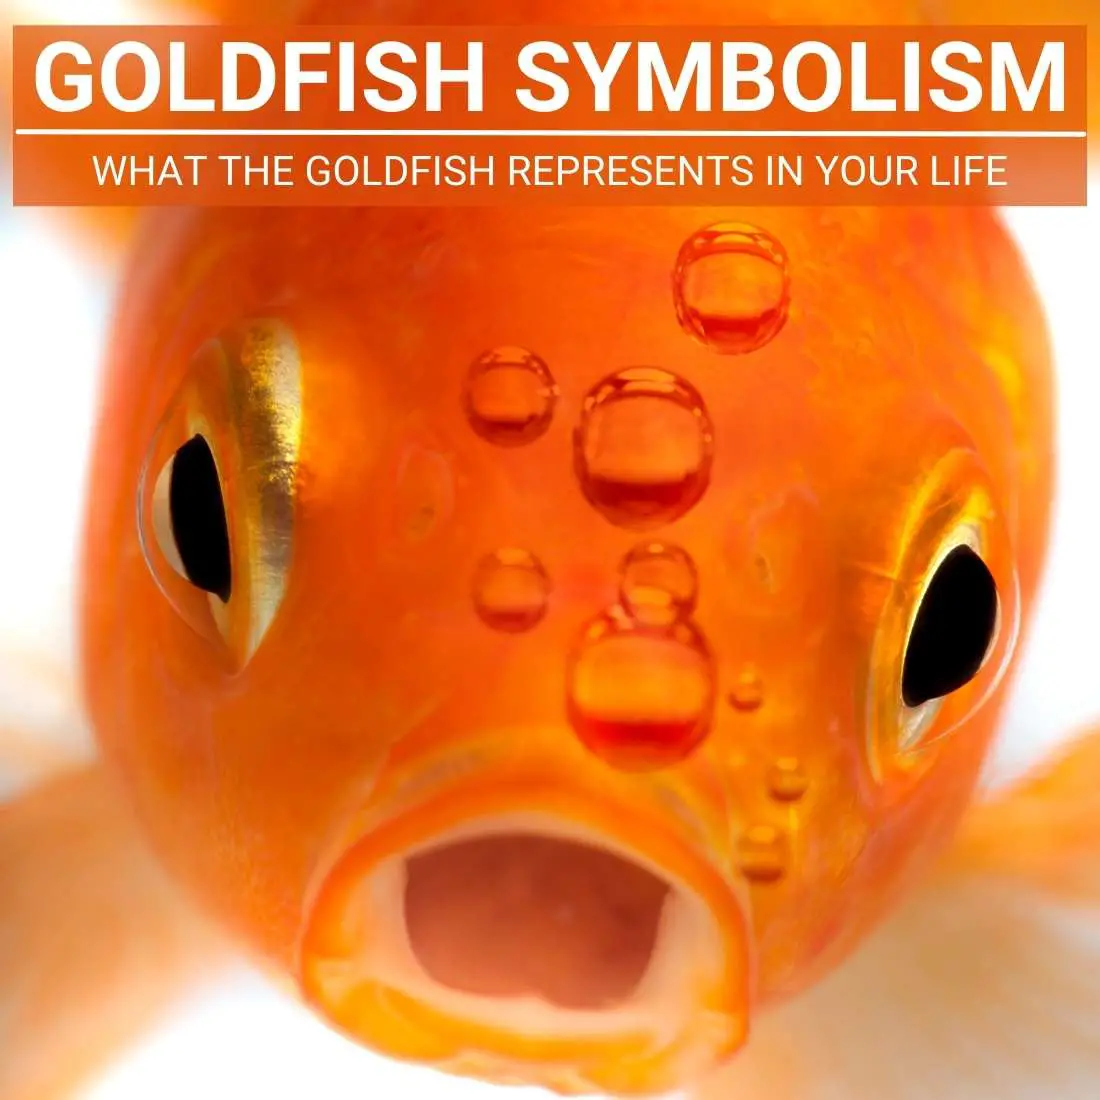 Goldfish Dreams In Different Cultures